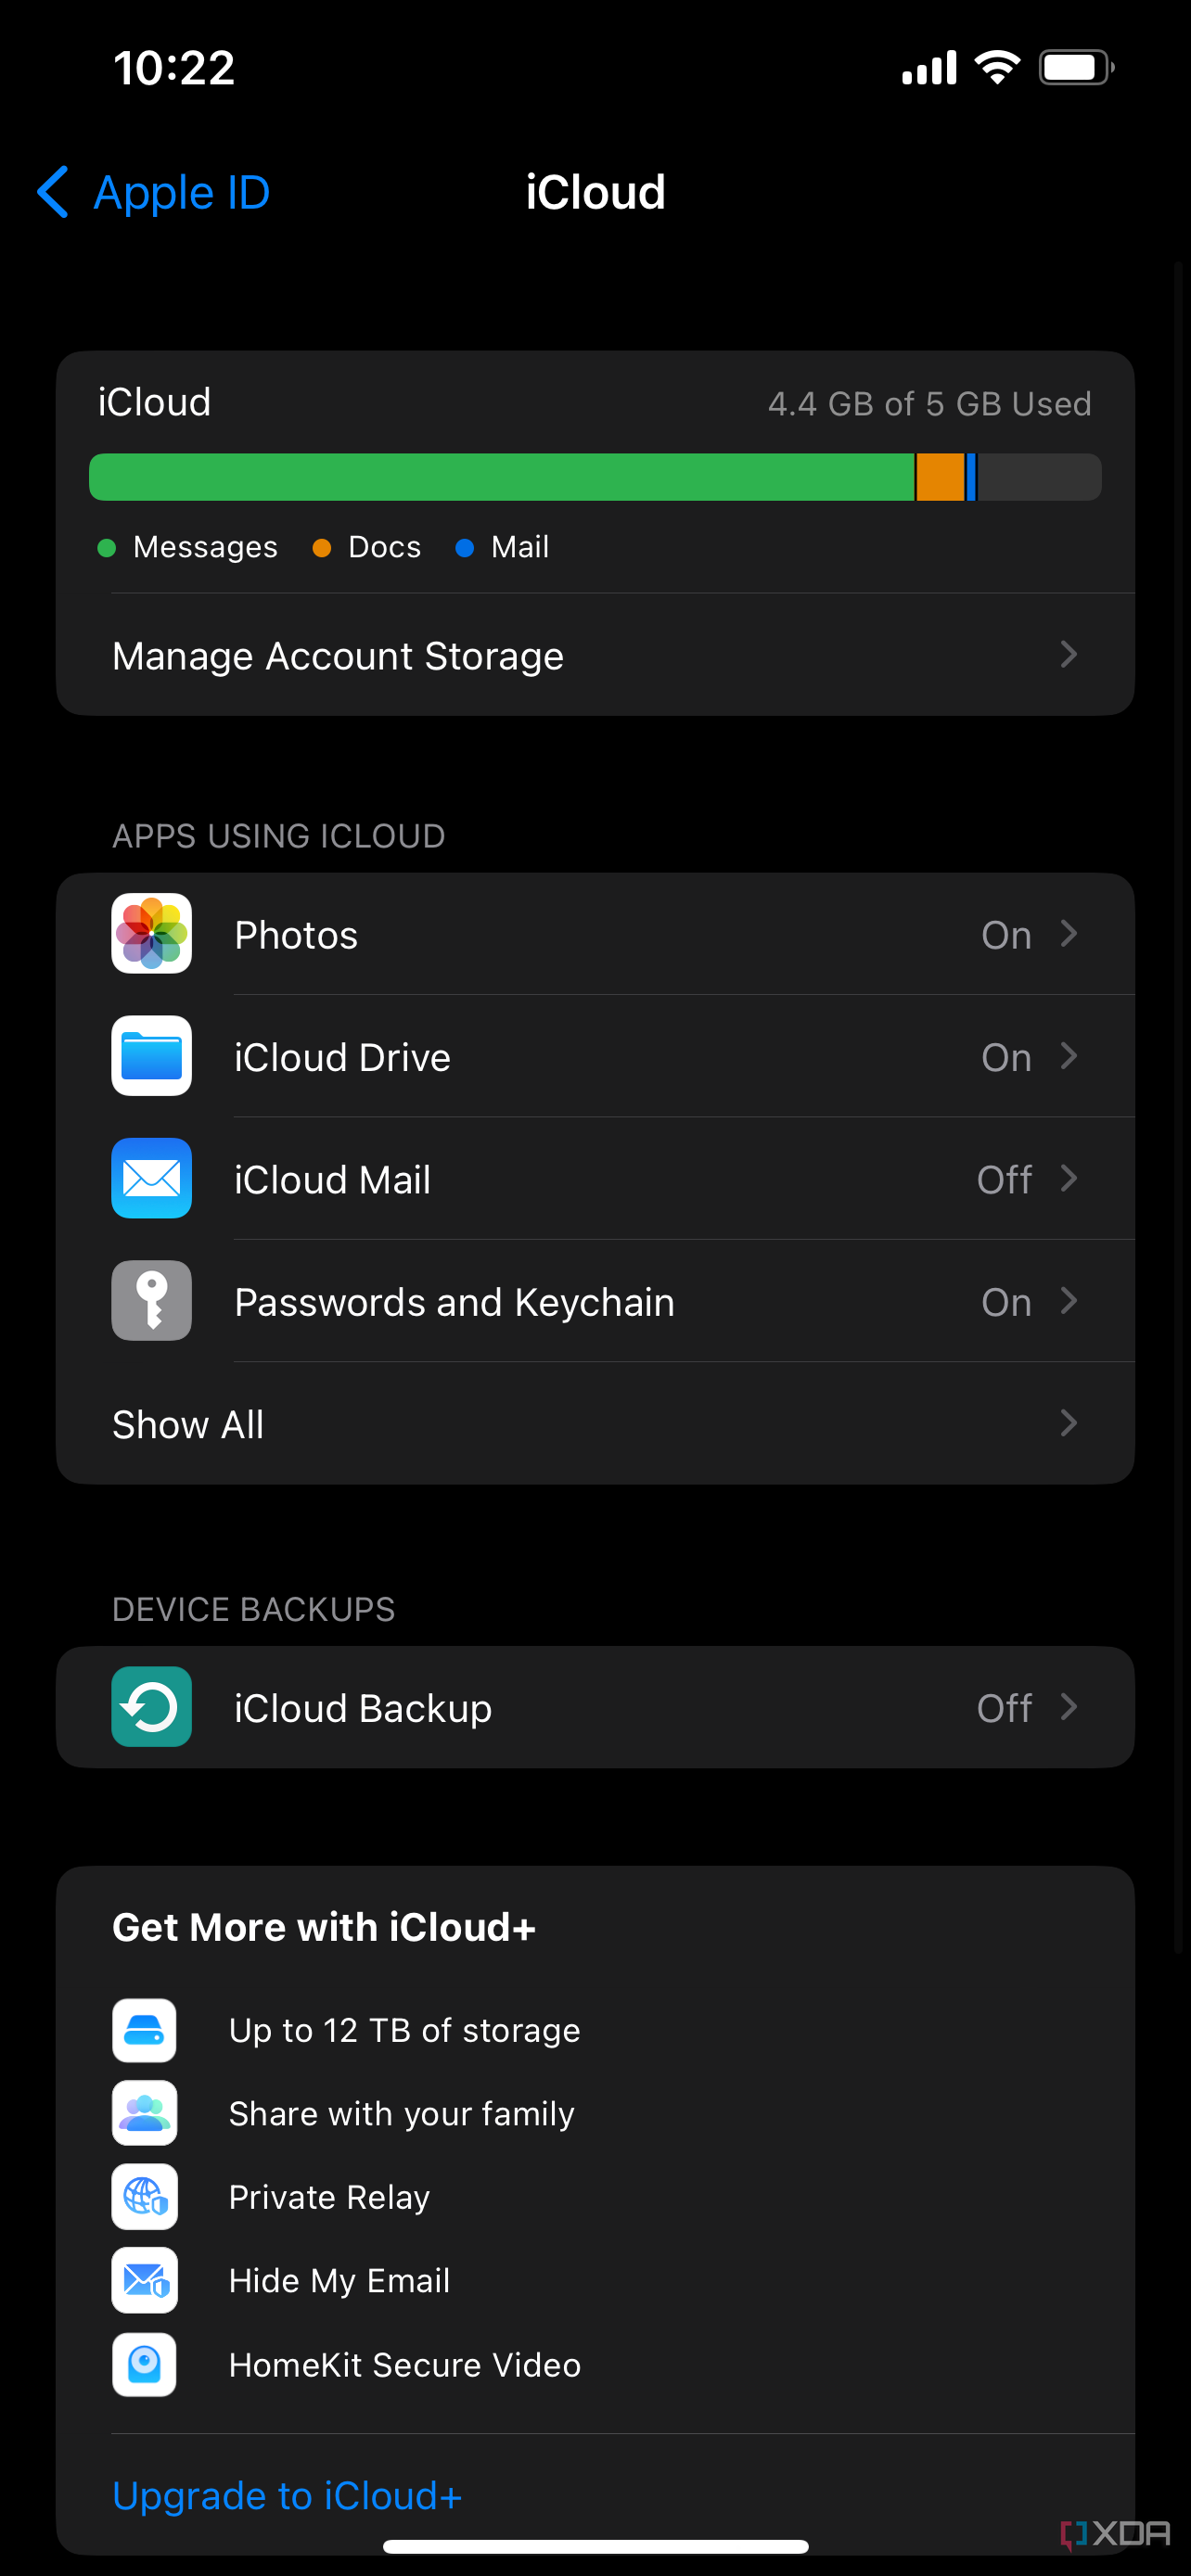 The show all settings for iCloud in iOS